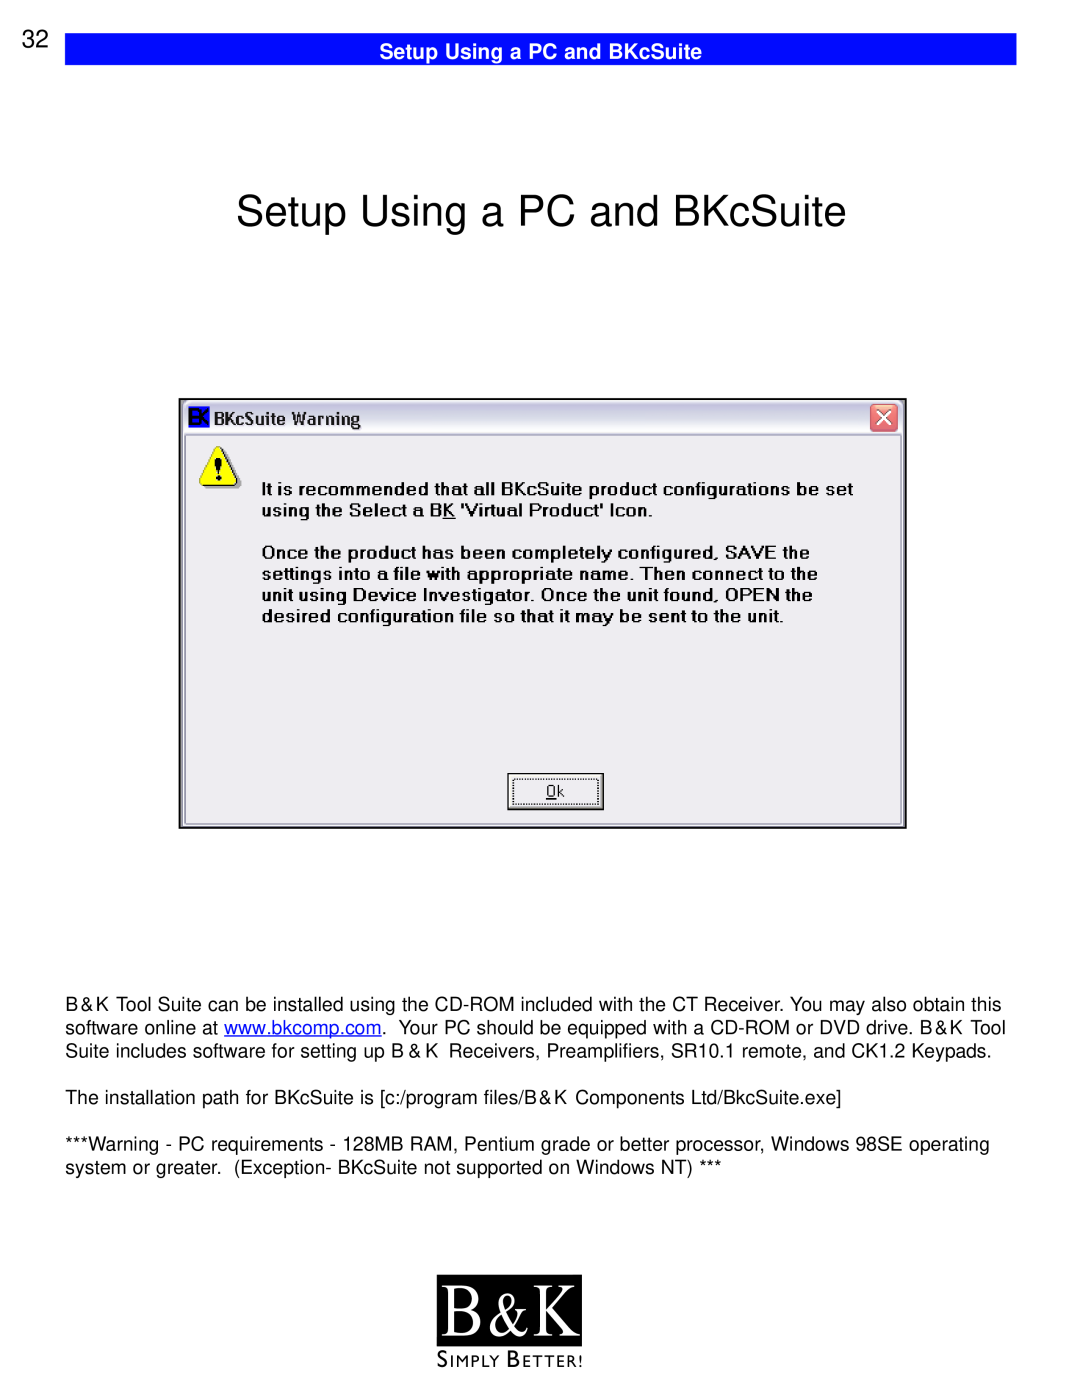 B&K CT602, CT600, CT310, CT610, CT300 user manual Setup Using a PC and BKcSuite, B & K 